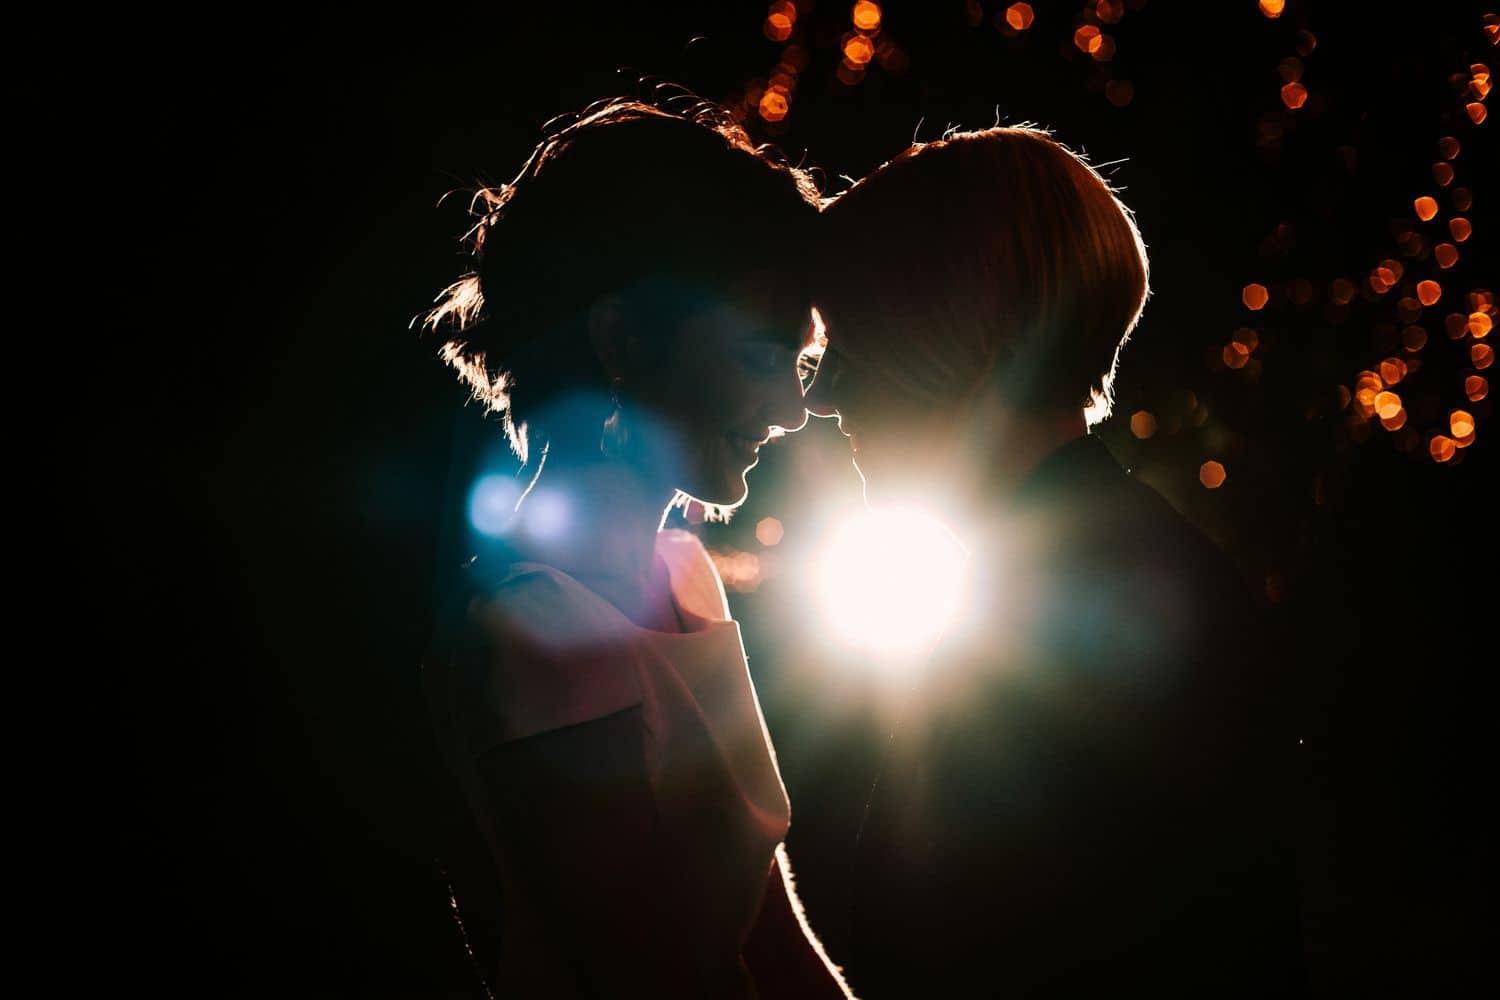 Wedding couple dancing in silhouette